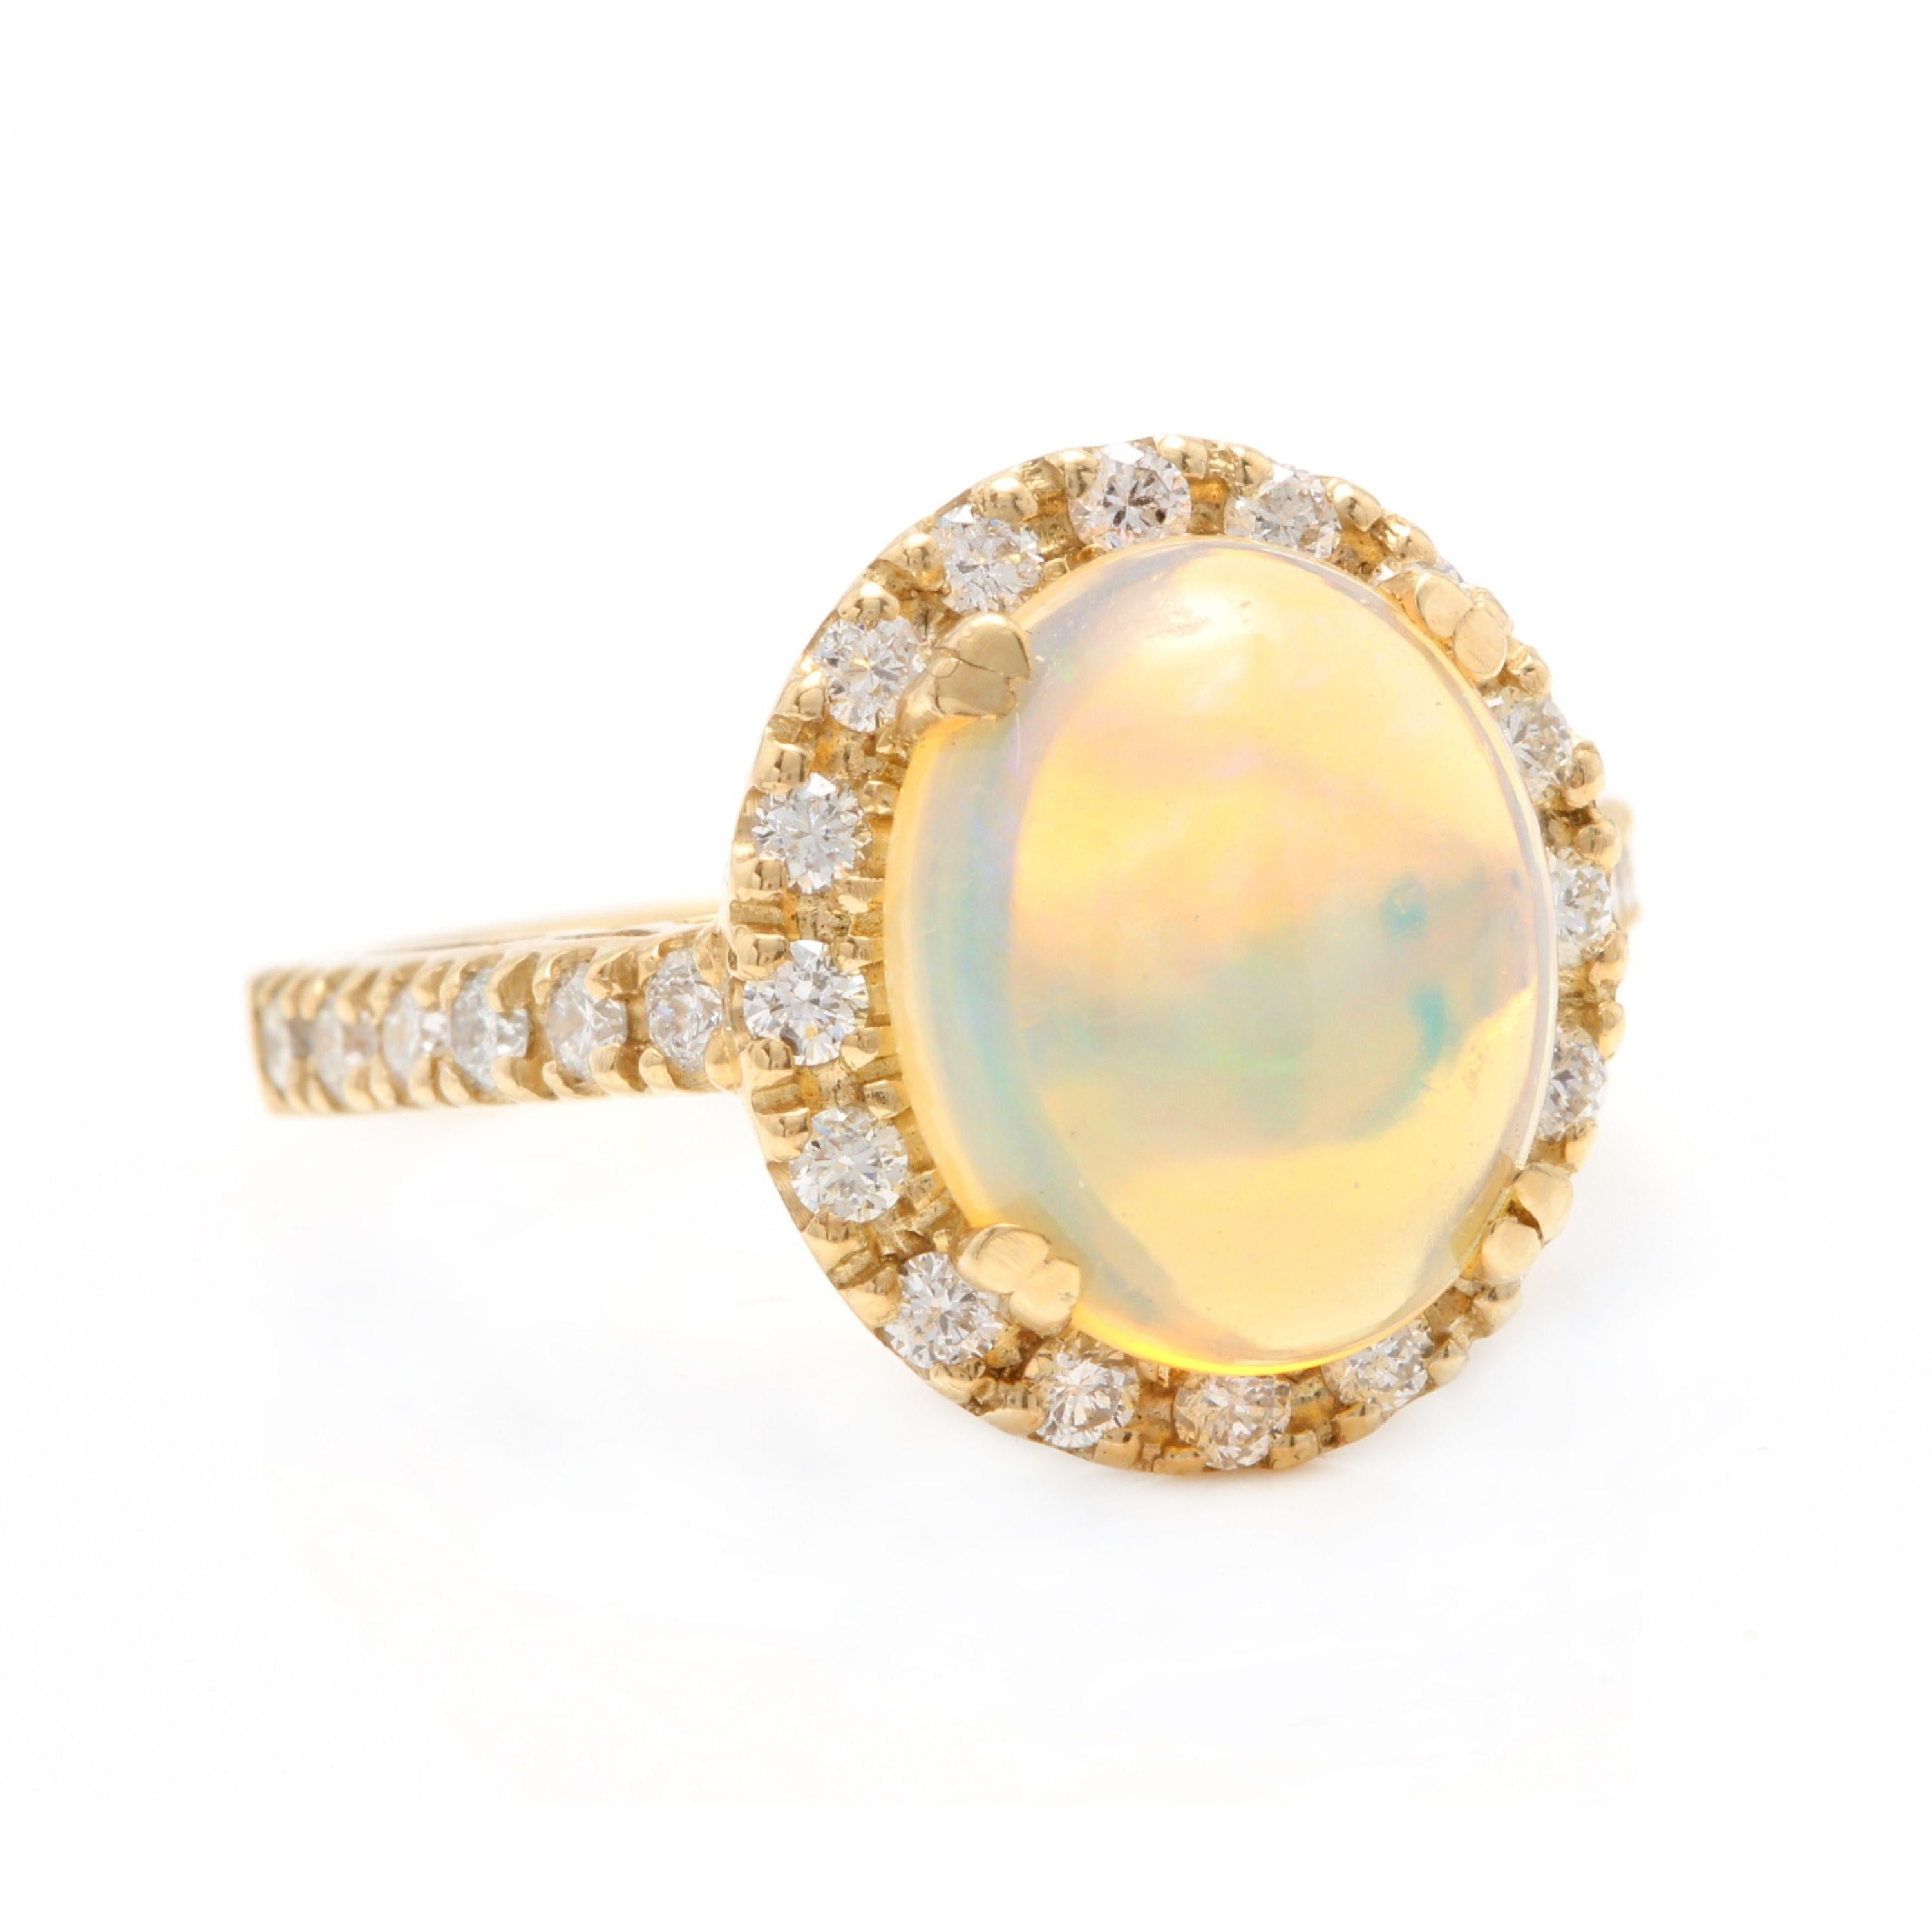 5.10 Carats Natural Impressive Ethiopian Opal and Diamond 14K Solid Yellow Gold Ring

Total Natural Opal Weight is: Approx. 4.50 Carats

Opal Measures: 12.00 x 10.00mm

Natural Round Diamonds Weight: Approx. 0.60 Carats (color G-H / Clarity